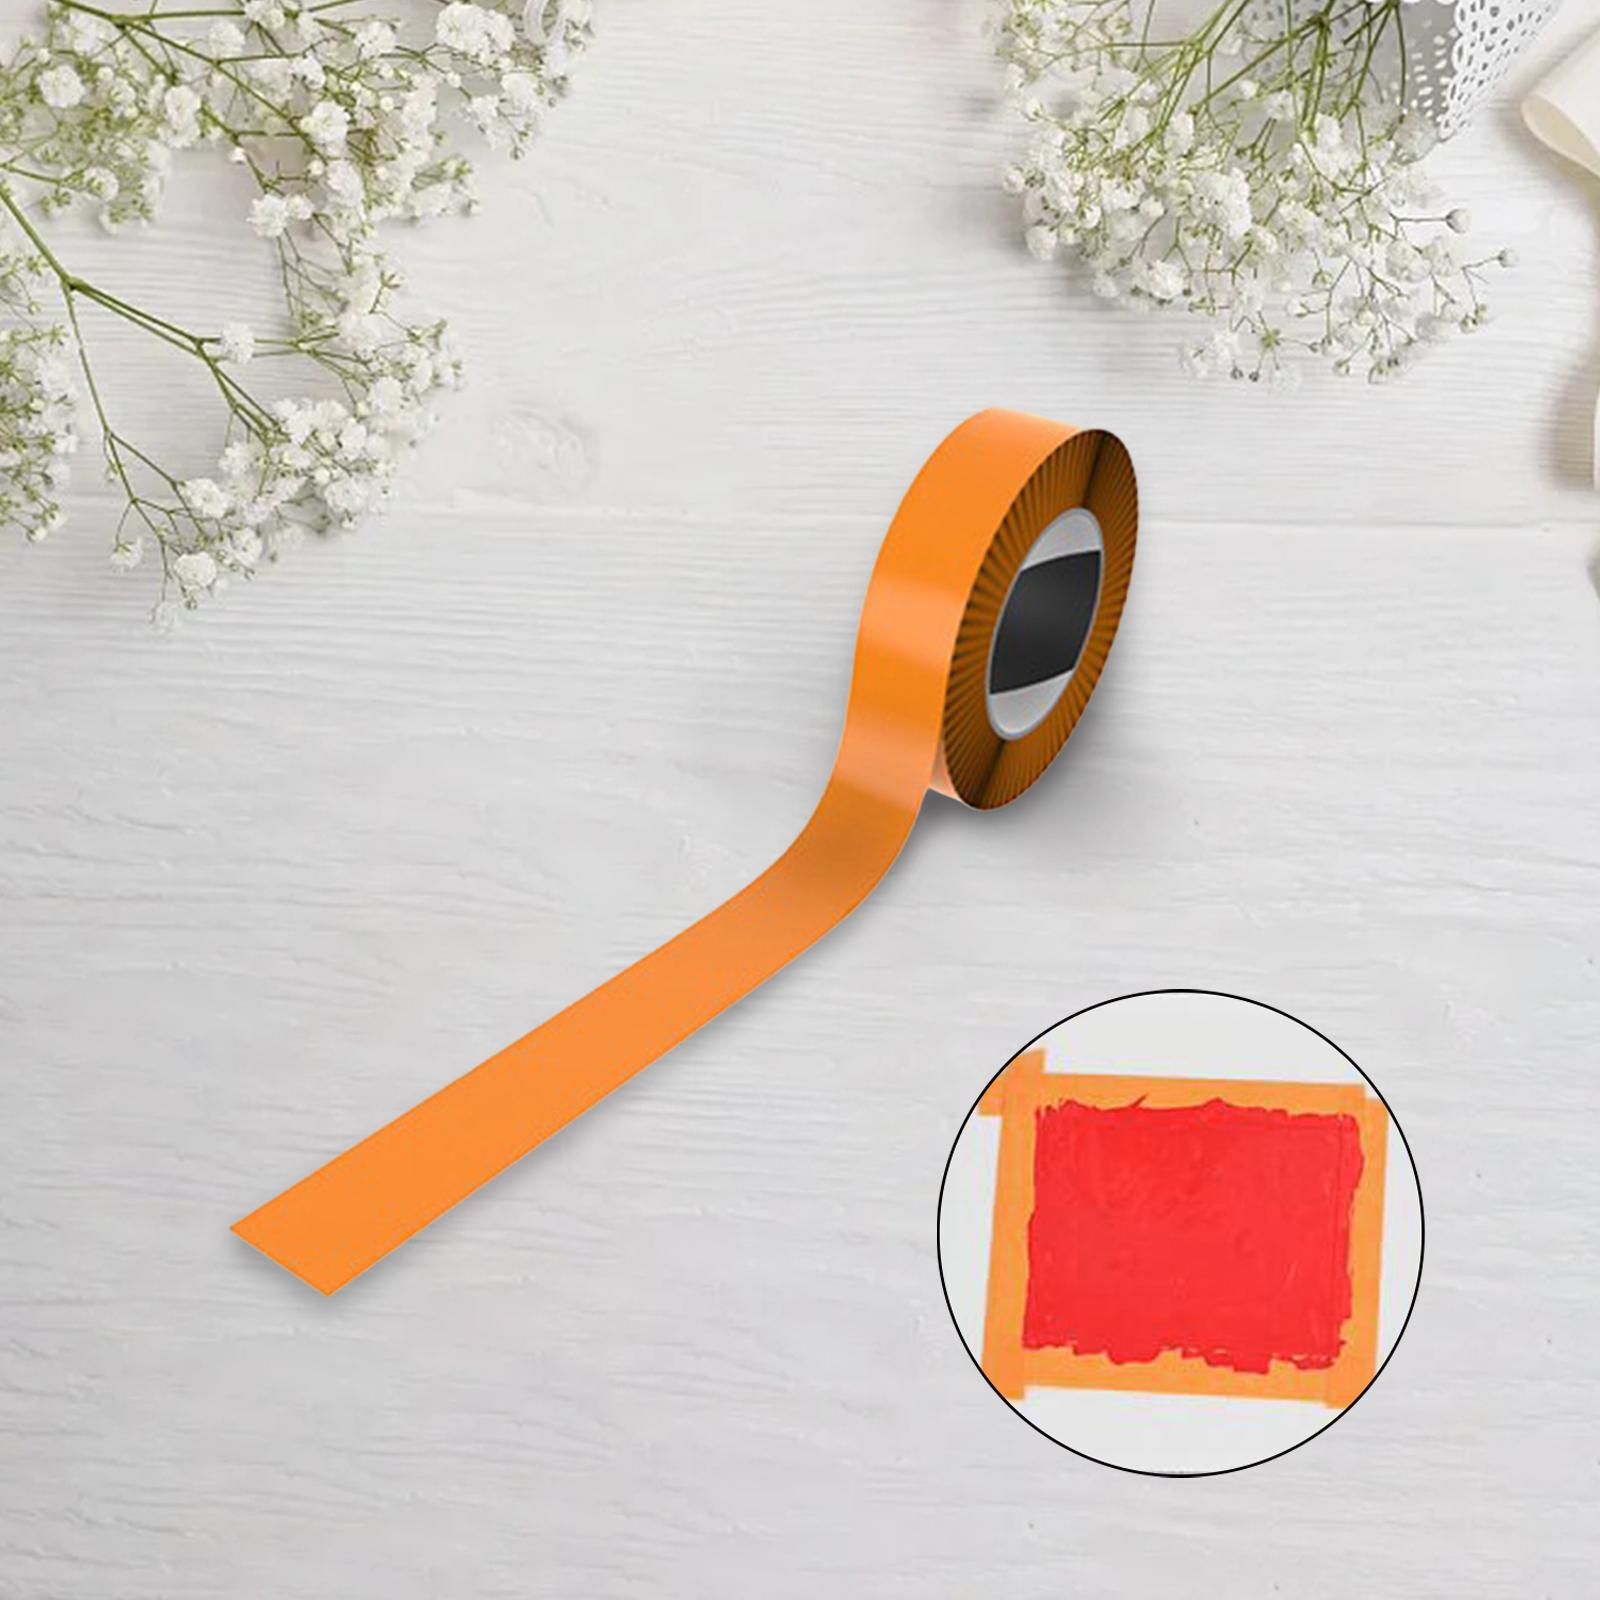 Miniature Toys Painting Tape, Painting Accessory Model, Making Accessories  Masking Tape Gifts for Friends, Family 1cmx900cm